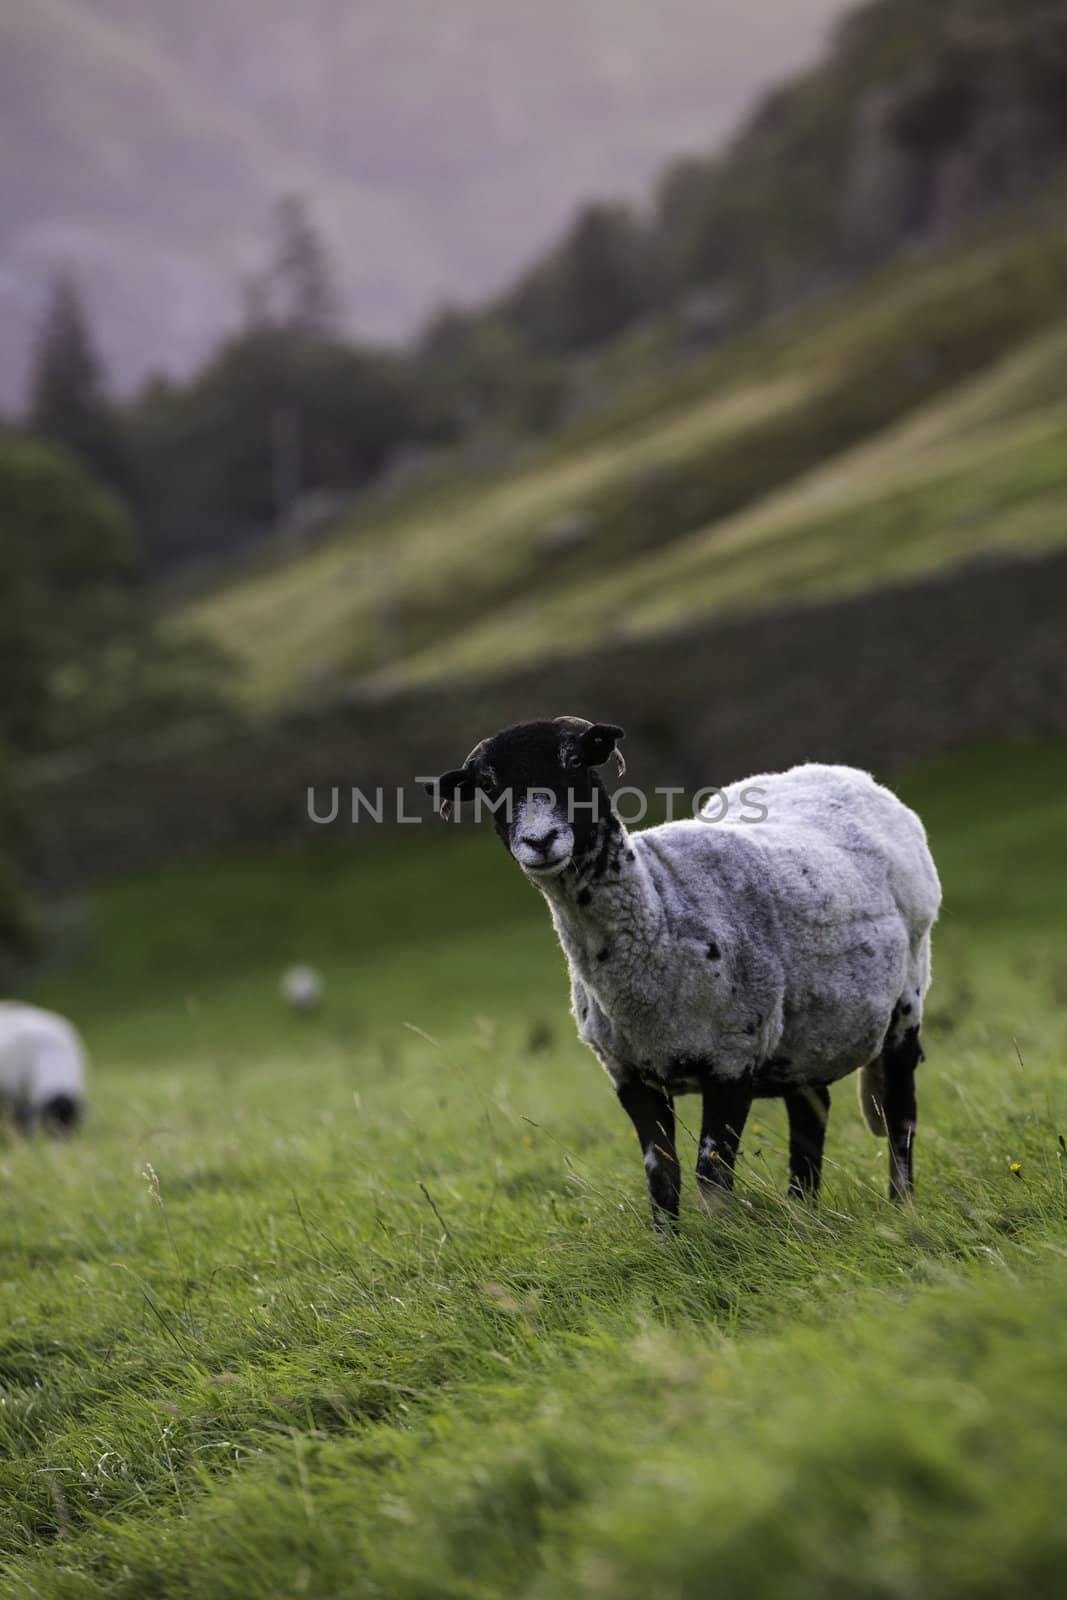 Herdwick sheep with the typical grey tinted fleece standing looking curiously at the camera in a pasture